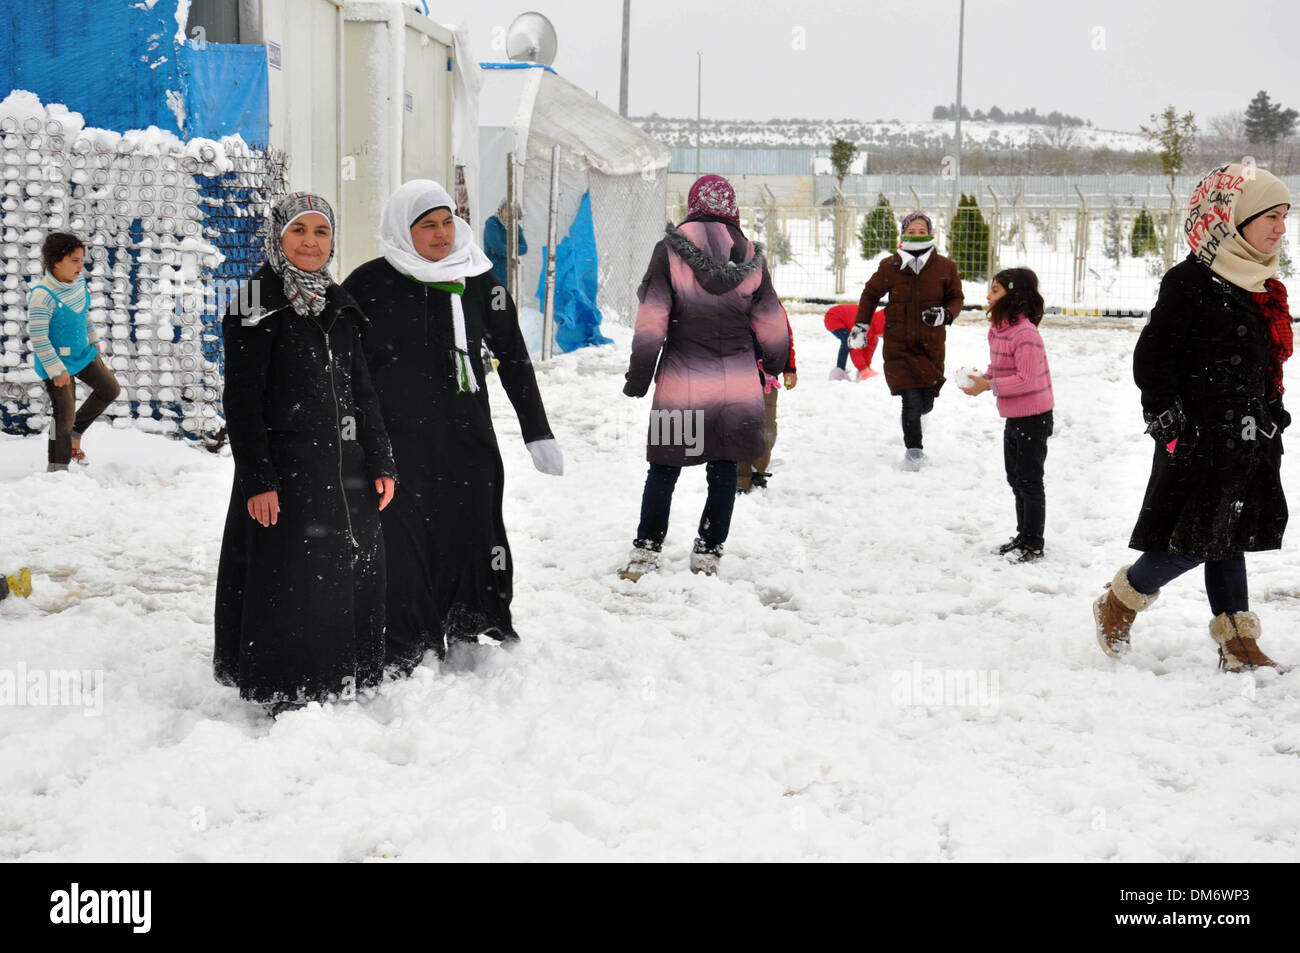 Kilis, Turkey. 12th Dec, 2013. Syrian refugees are seen at a refugee camp in Kilis province, Turkey, Dec. 12, 2013. Heavy snowfall across Turkey hit Syrian refugee camps in Kilis as well. Credit:  Mert Macit/Xinhua/Alamy Live News Stock Photo